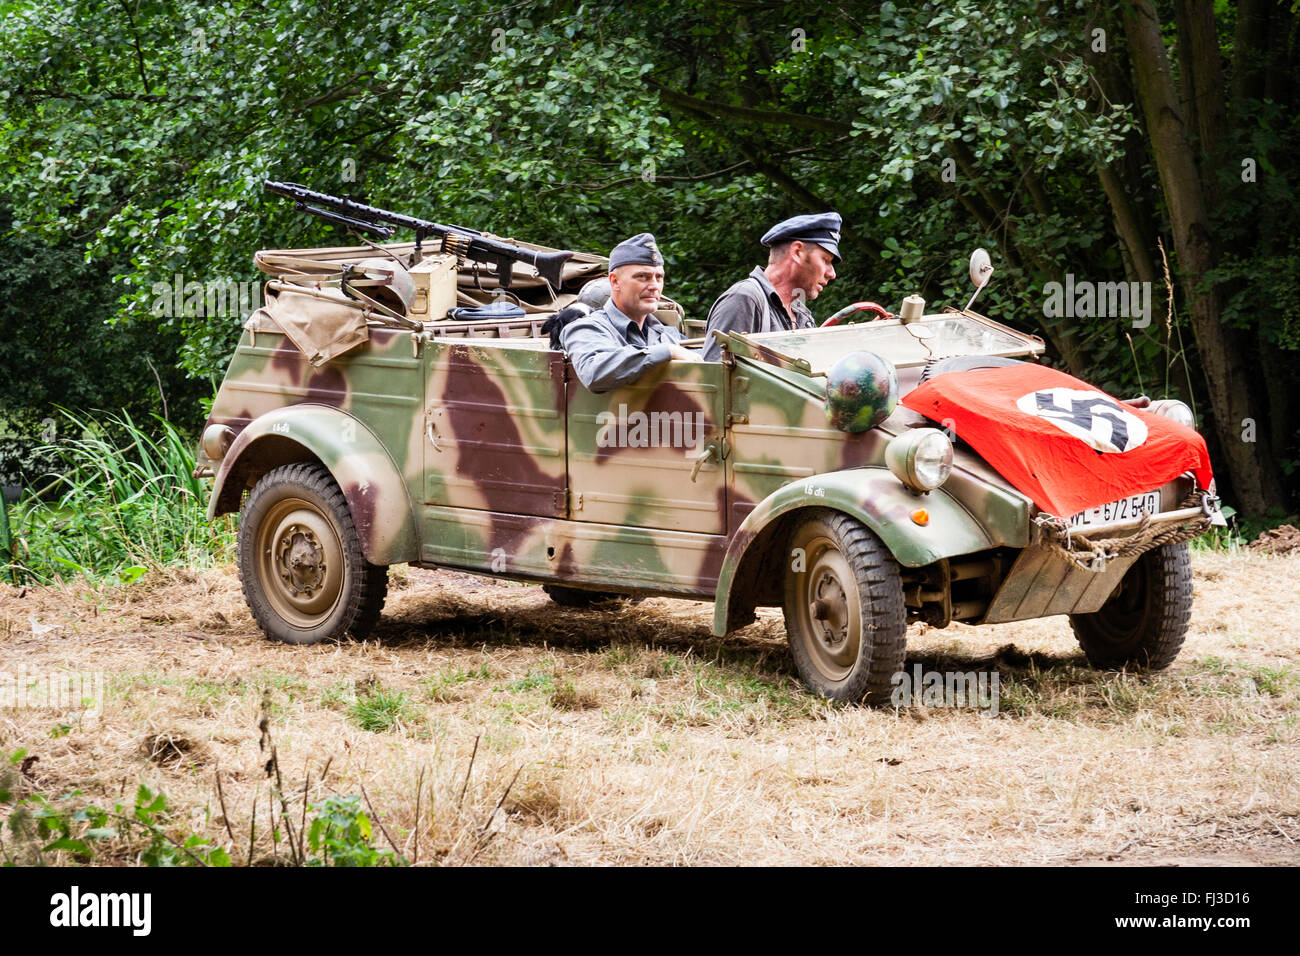 War and peace show, England. Second World war re-enactment. German camouflaged Kubel car with two officers and Nazi flag drapped over bonnet, hood. Stock Photo